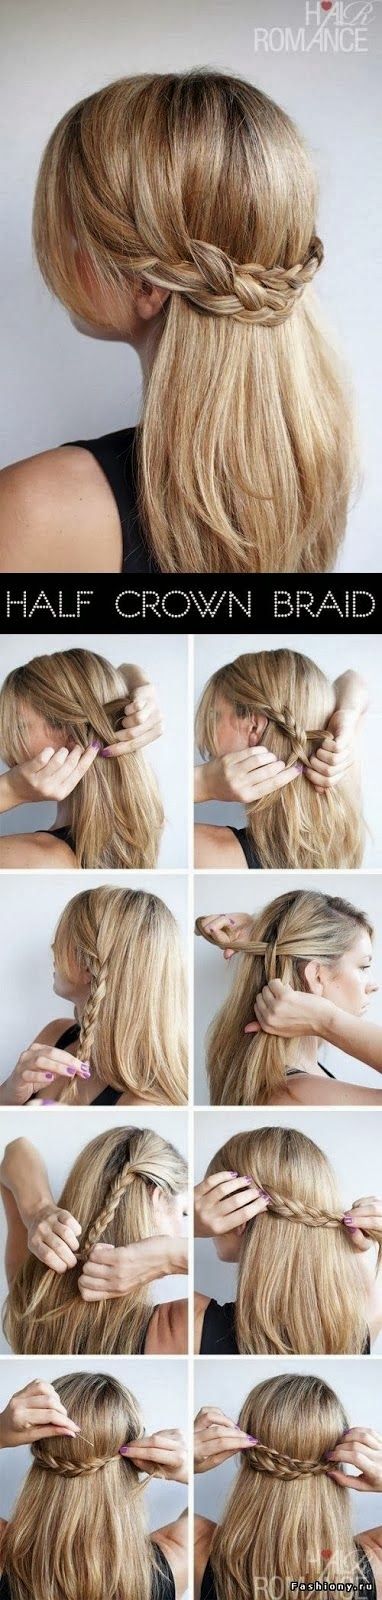 50 Updo Hairstyles for Special Occasion from Instagram Hair Gurus 